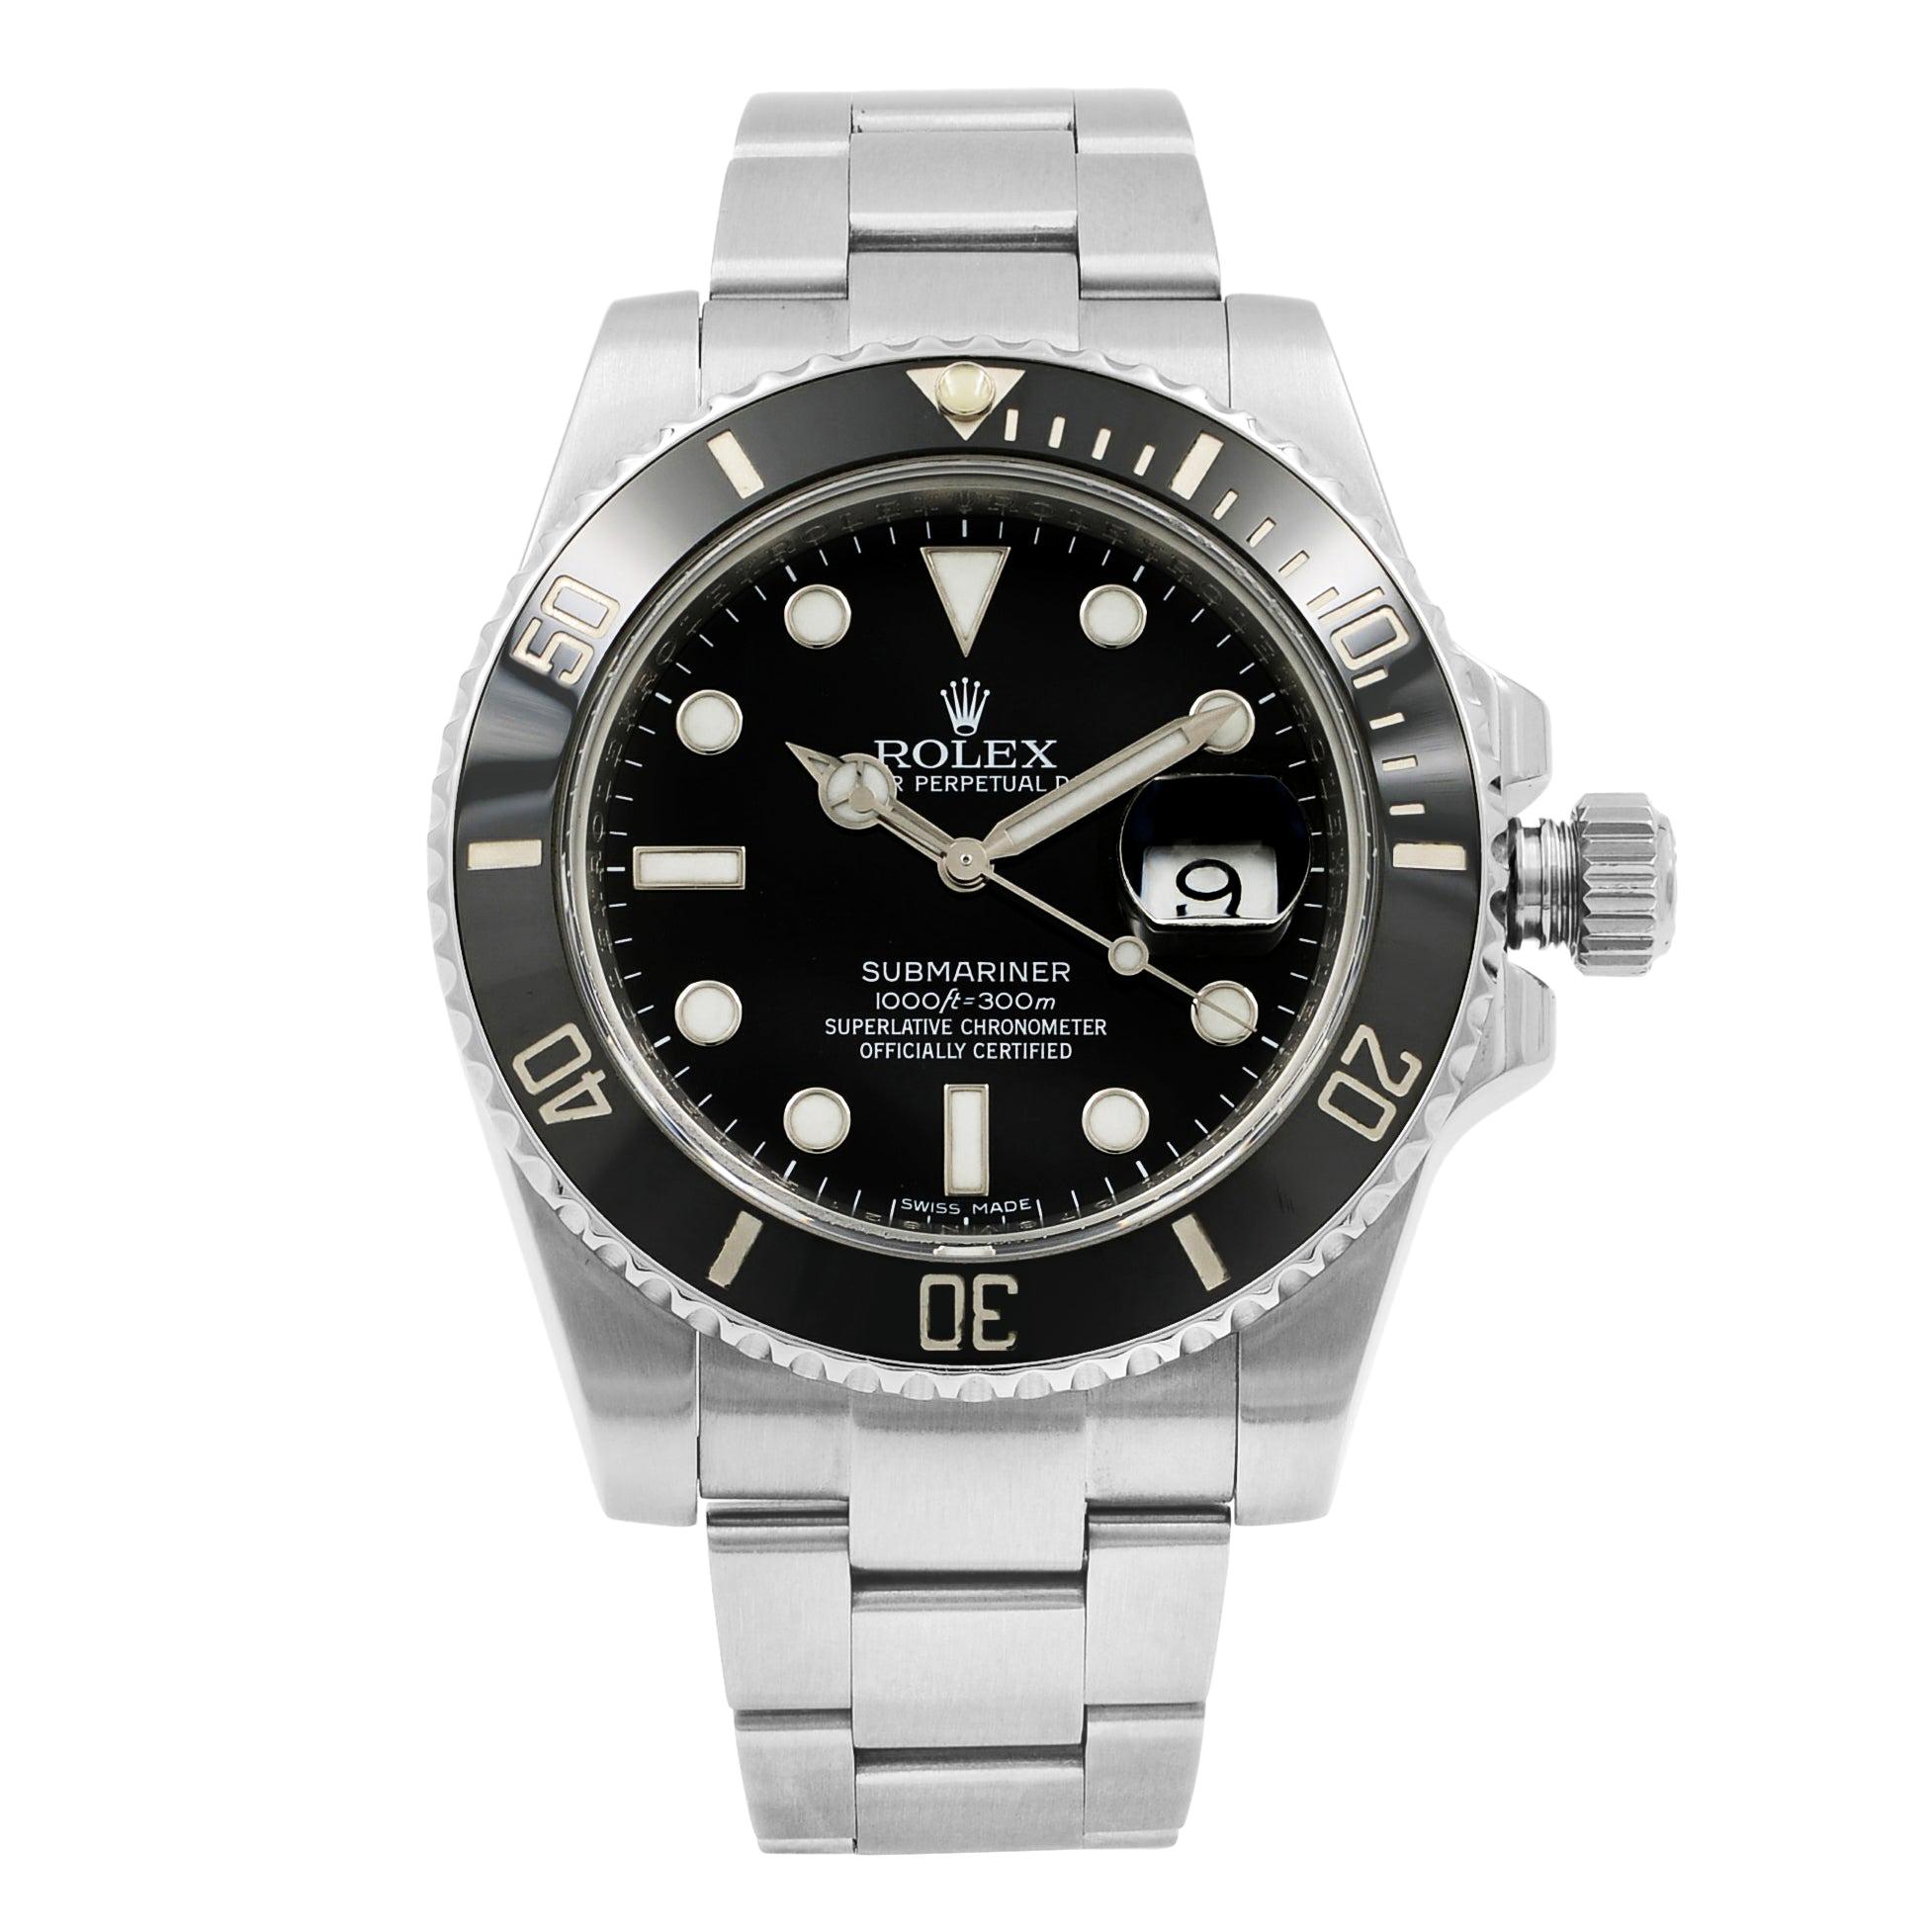 Rolex Submariner 116610LN Black Dial Stainless Steel Automatic Men's Watch